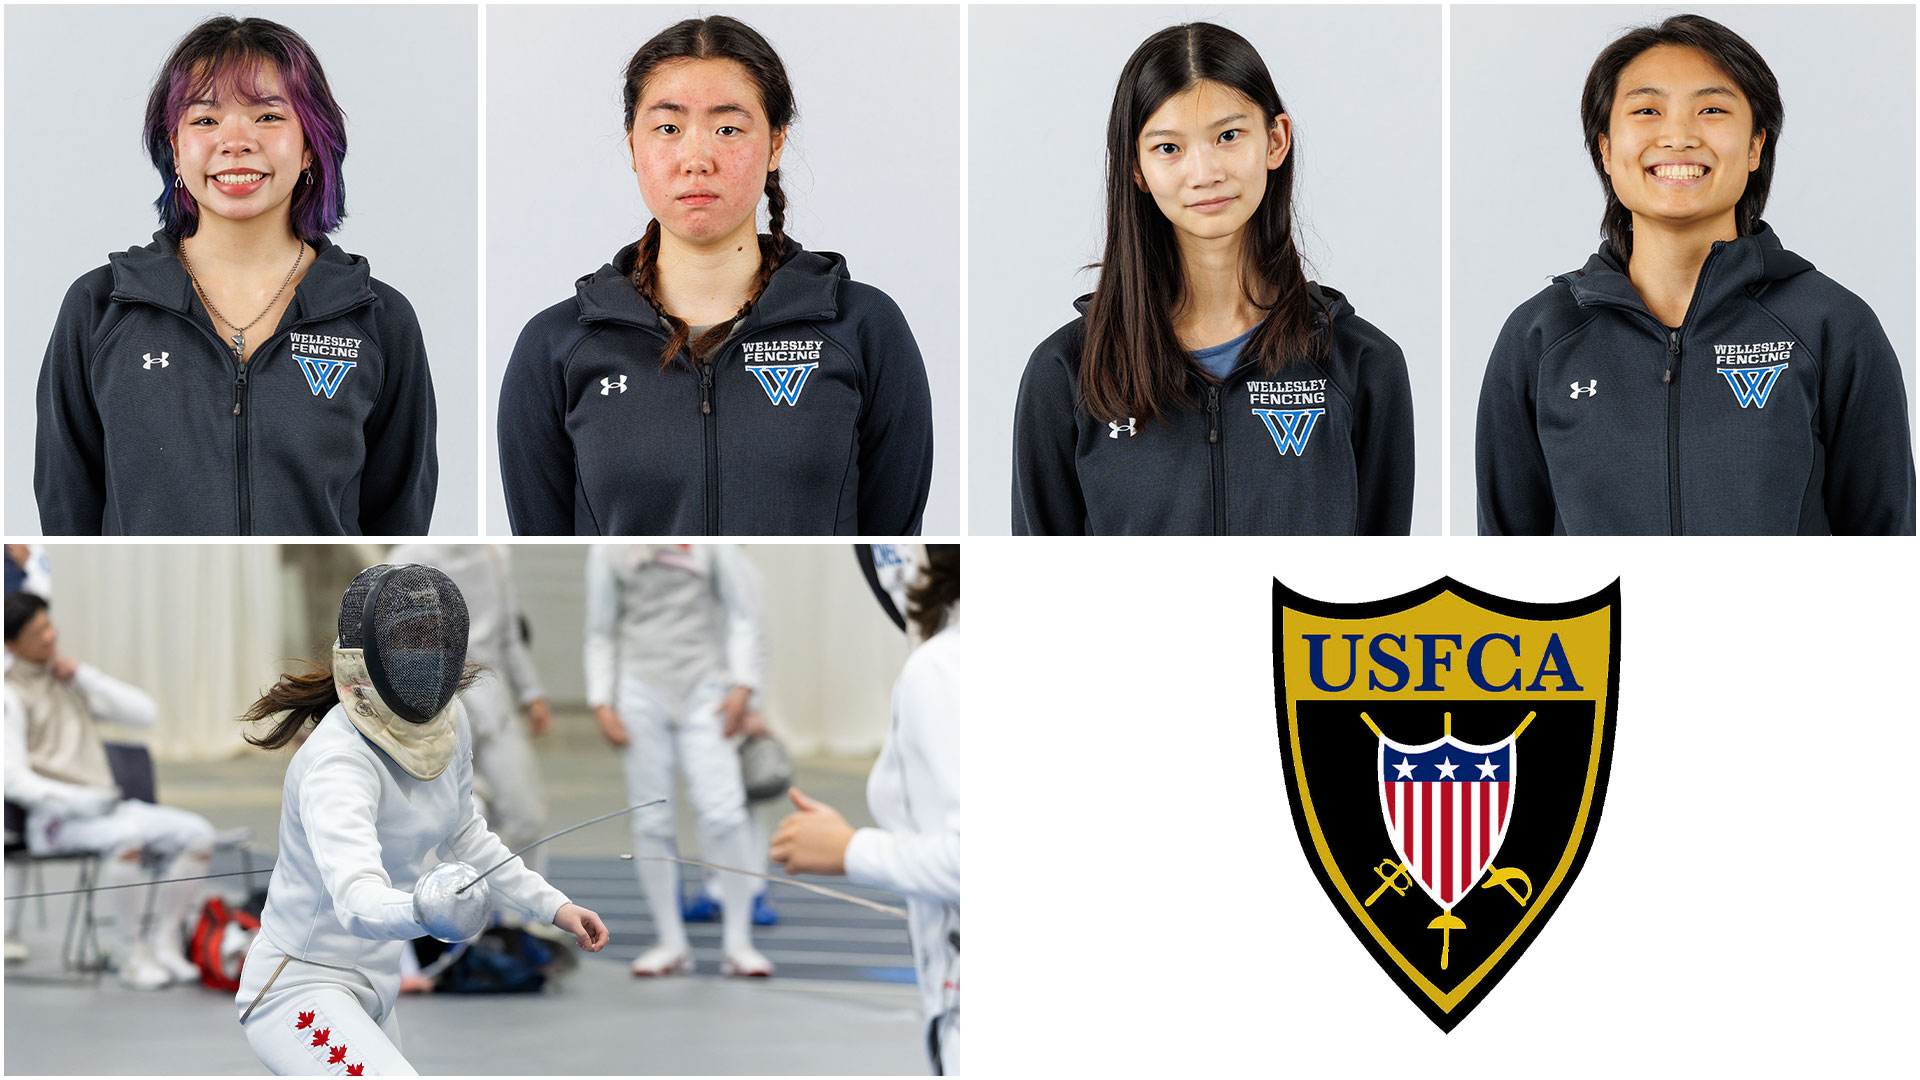 Four members of Wellesley fencing made the USFCA Division III All-America team (Frank Poulin)